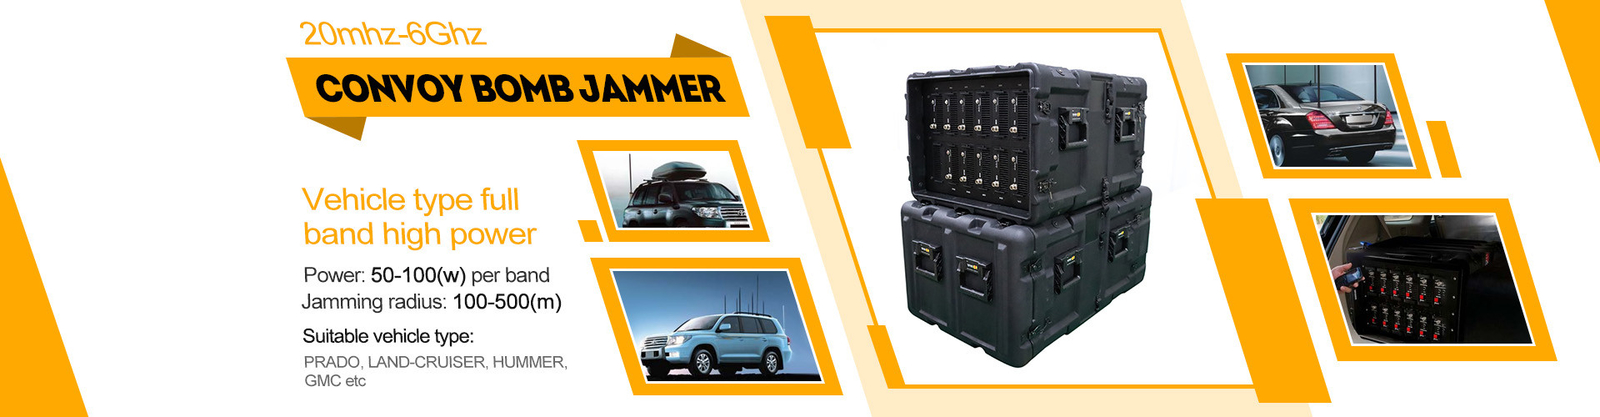 Full Band Convoy Bomb Jammer 20 - 6000MHz Vehicle Type High Power 720w